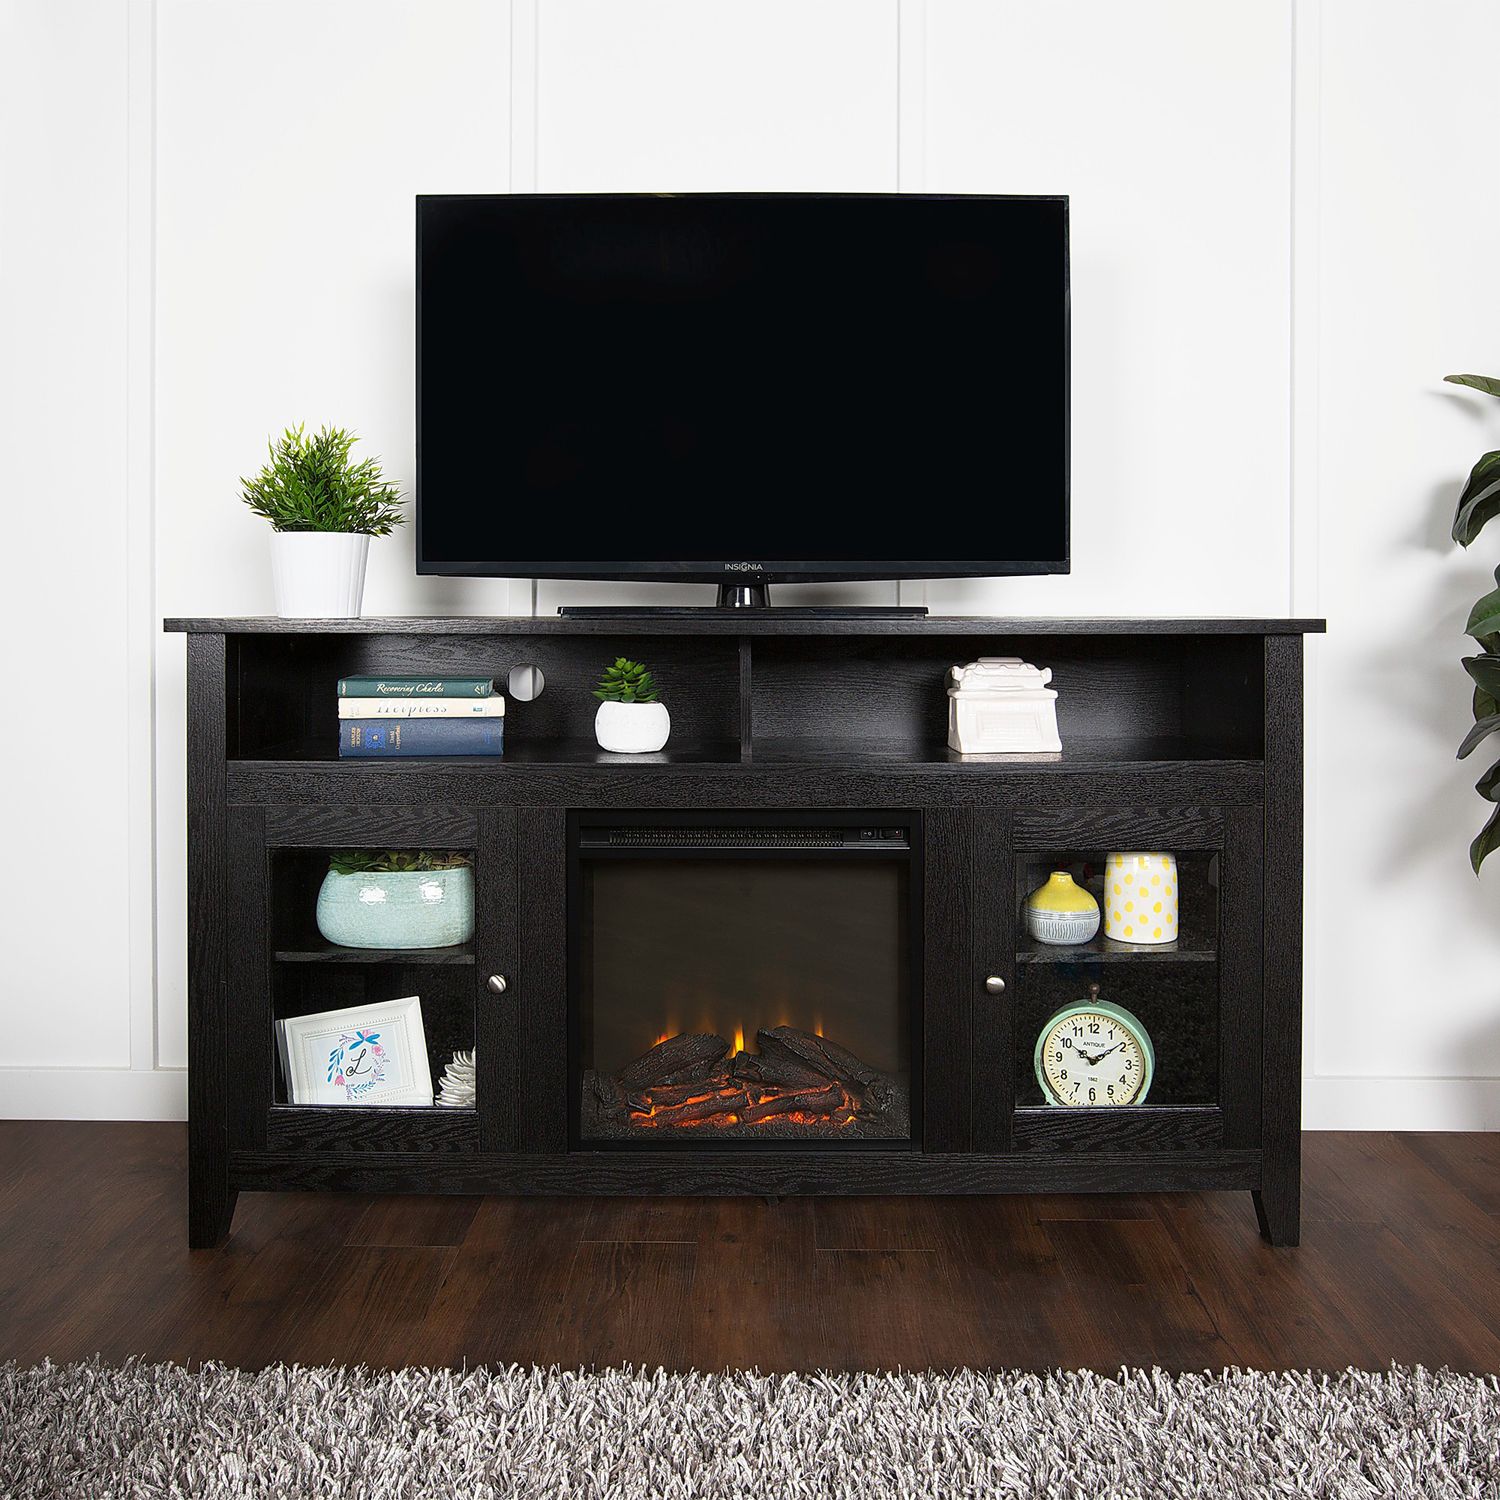 Highboy Wood Fireplace Tv Stand – Pier1 In Wood Highboy Fireplace Tv Stands (Gallery 13 of 20)